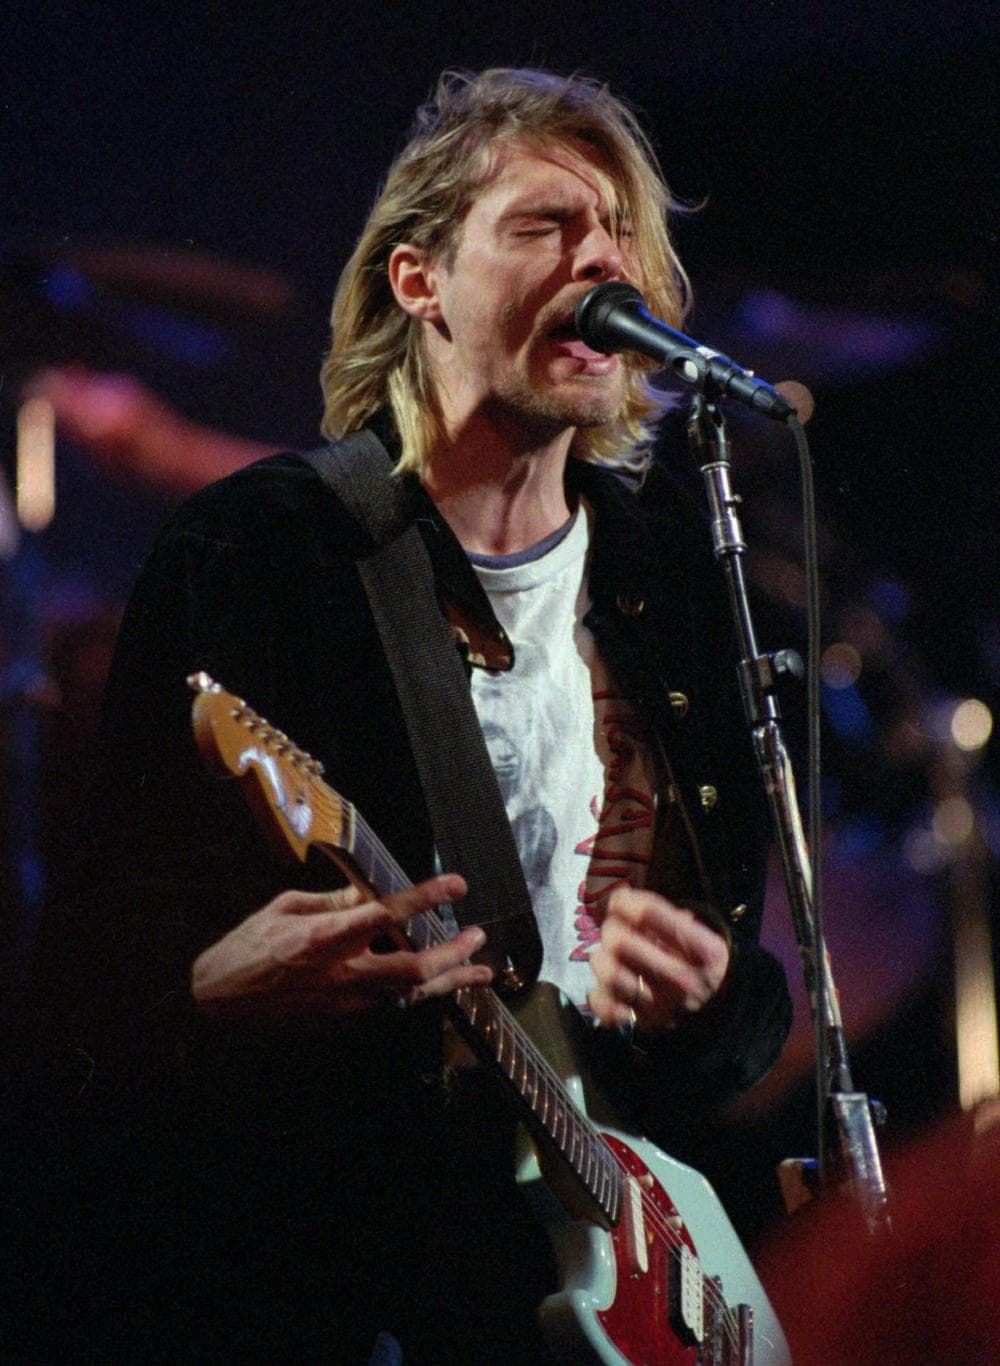 The late Kurt Cobain, former singer and songwriter of the Seattle band &quot;Nirvana.&quot; He committed suicide 17 years ago this month. (AP)